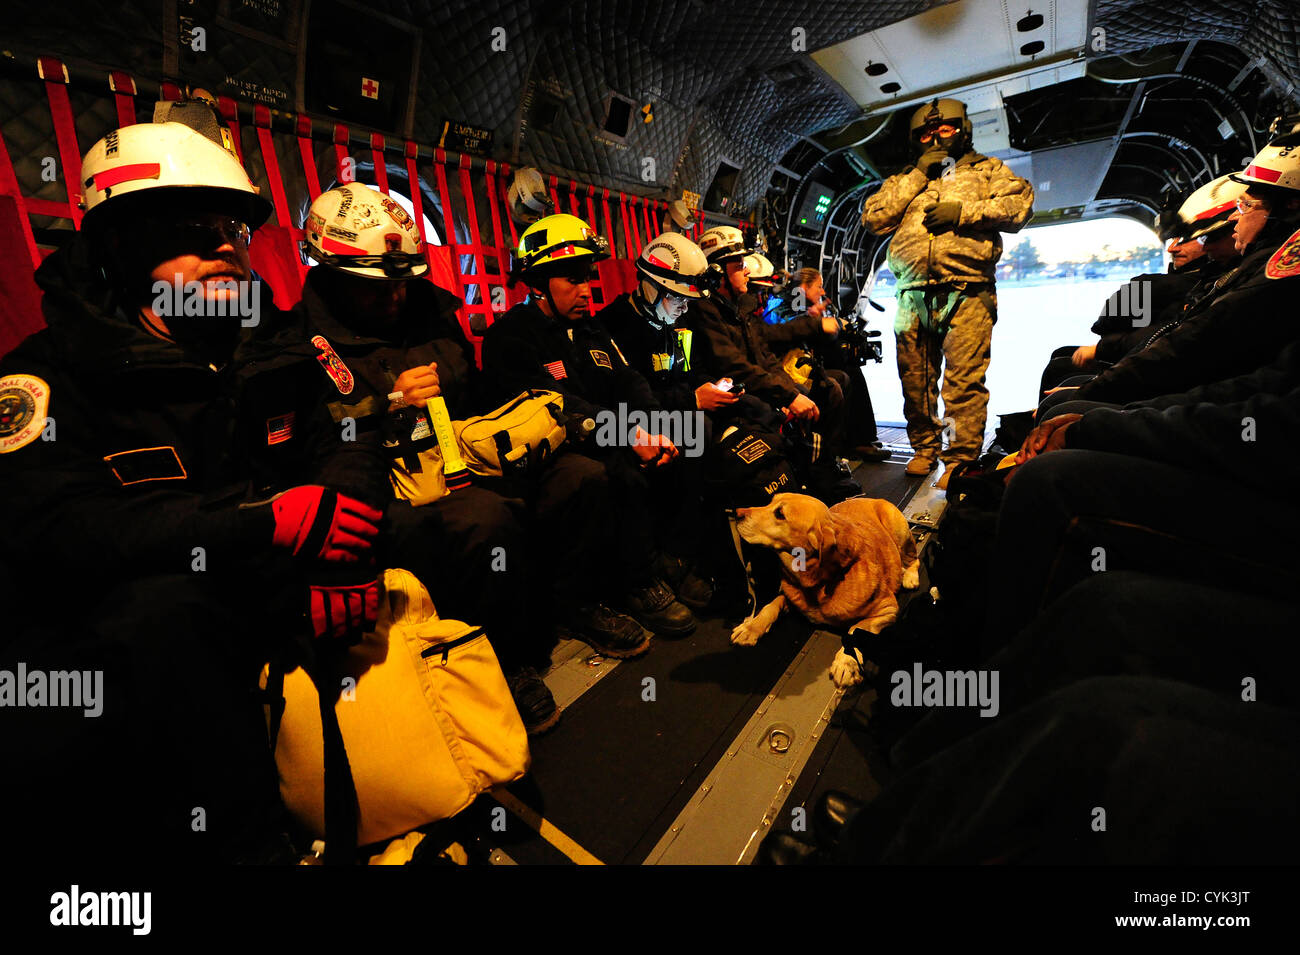 JOINT BASE MCGUIRE-DIX-LAKEHURST, N.J. – Members of Maryland Urban Search and Rescue Task Force one fly aboard a U.S. Army CH-47 helicopter assigned to the Georgia Army National Guard from Joint Base McGuire-Dix-Lakehurst, N.J. to Staten Island, N.Y. to c Stock Photo